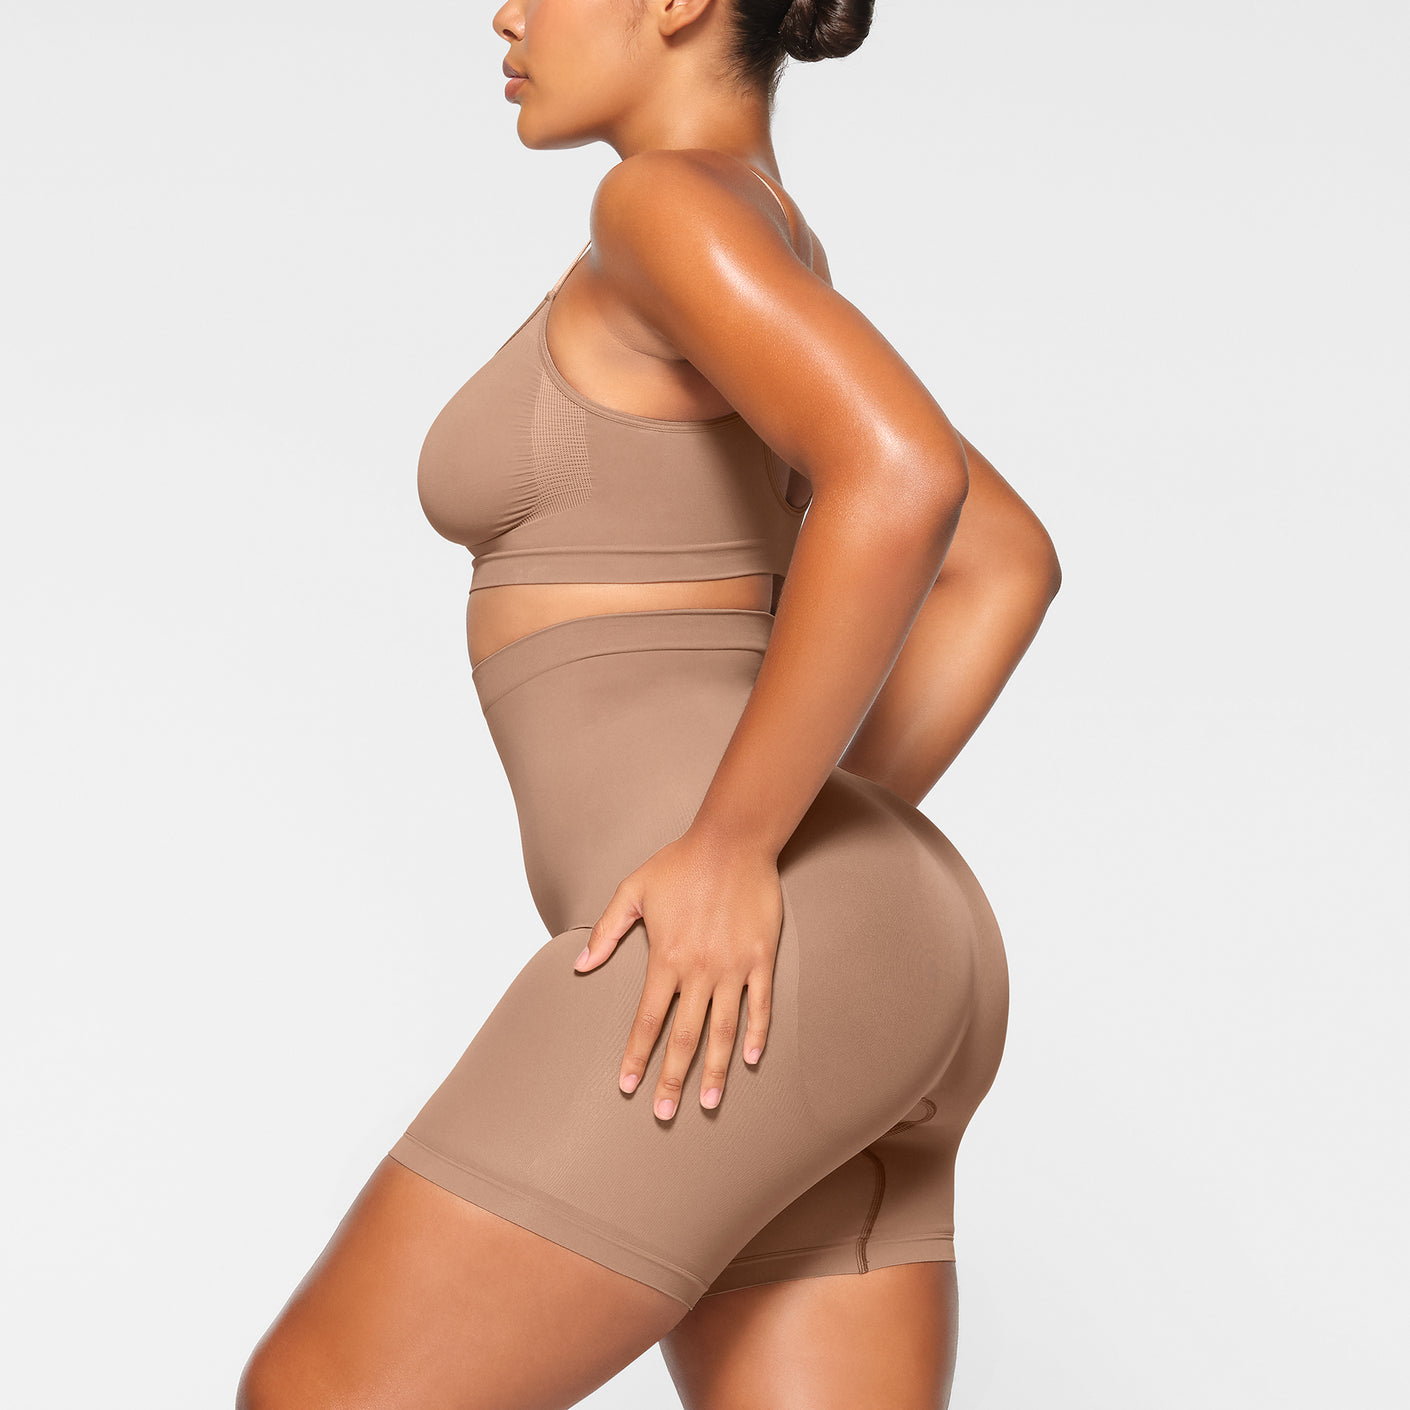 Track Barely There Low Back Catsuit - Sienna - M at Skims